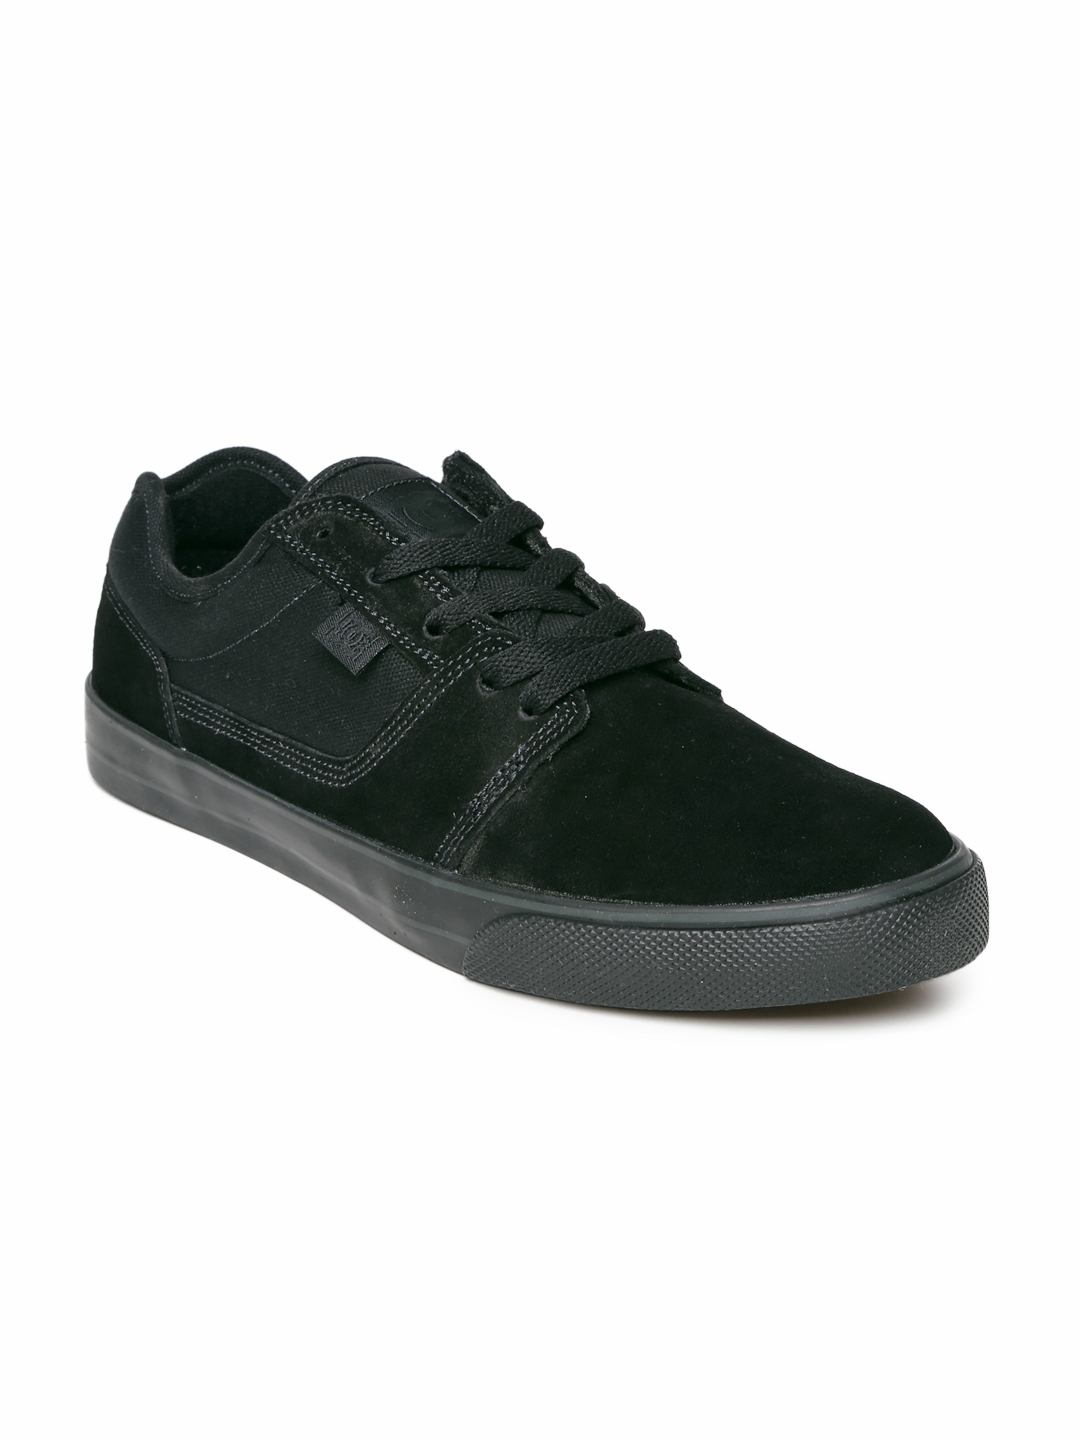 Buy DC Men Black Suede Casual Shoes - Casual Shoes for Men 946142 | Myntra